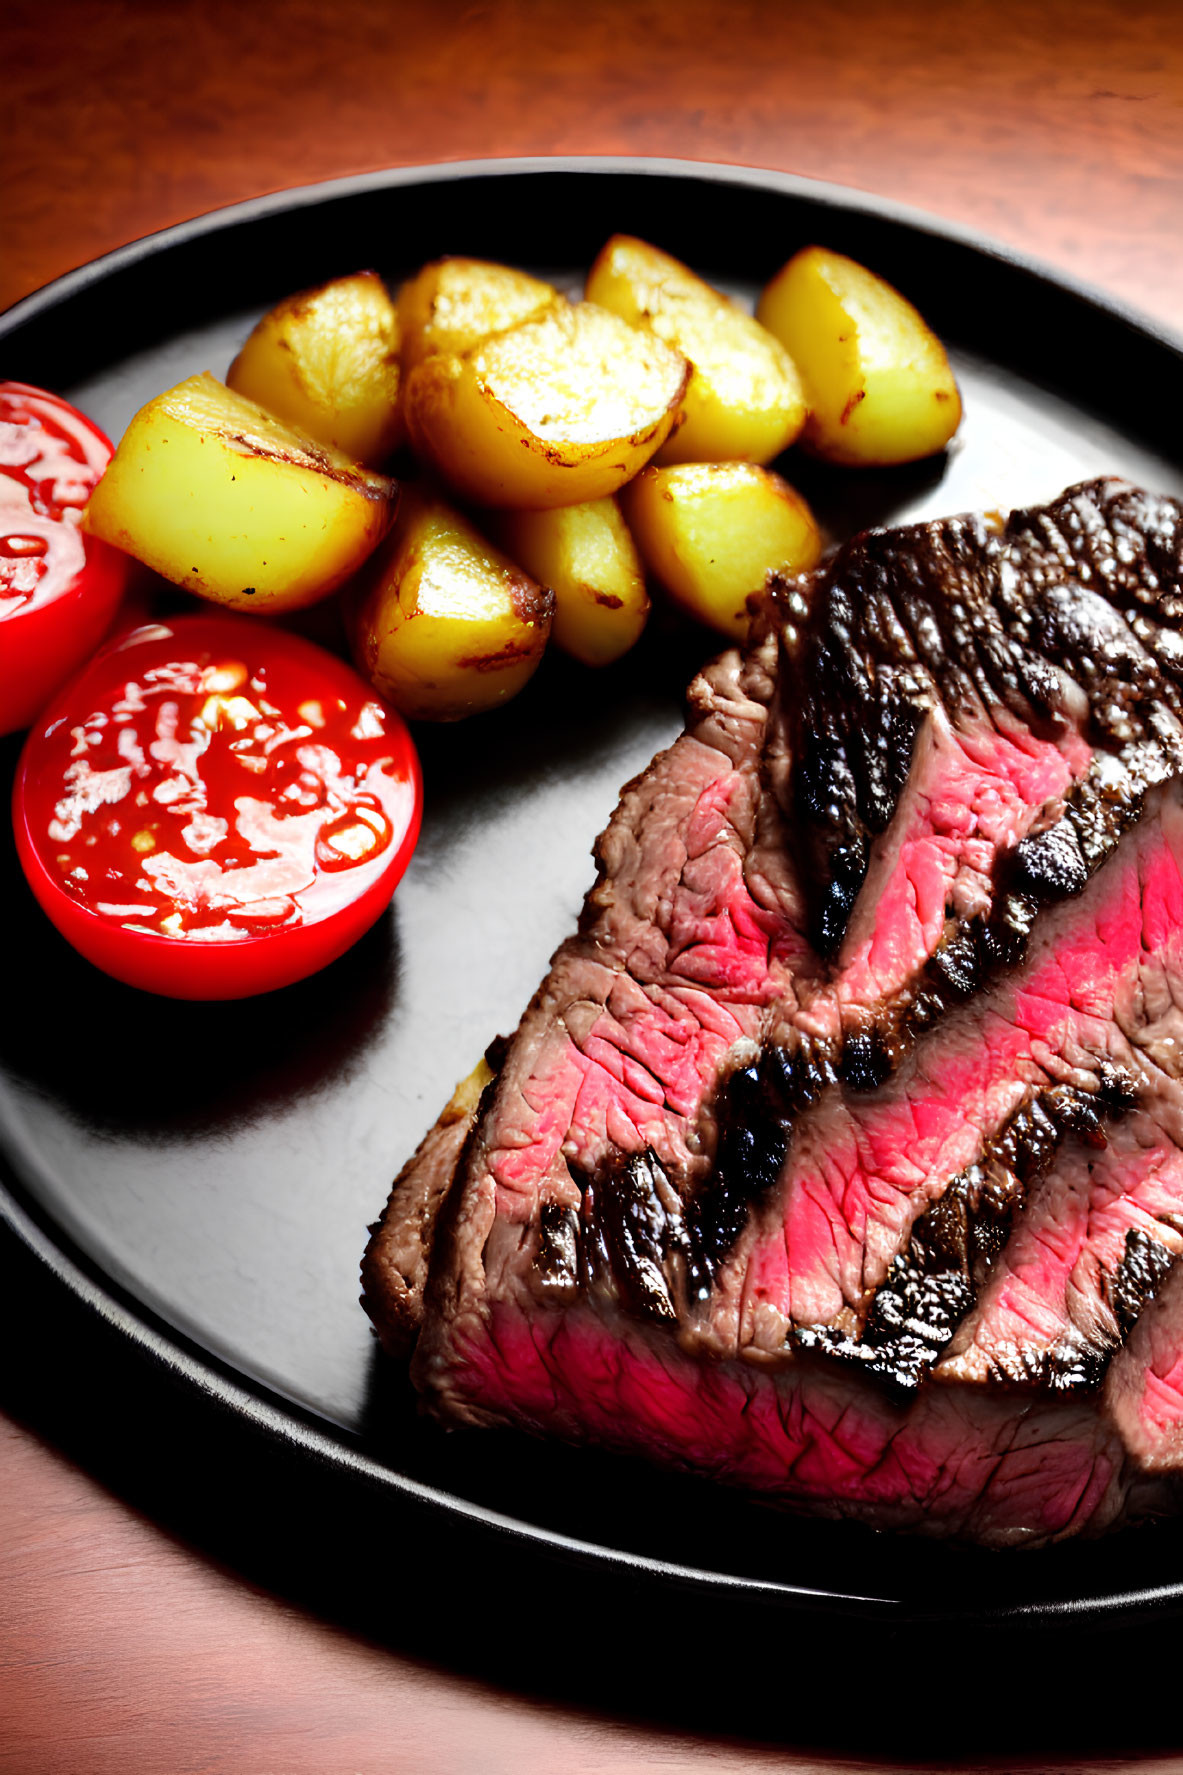 Grilled Steak with Roasted Potatoes and Tomatoes on Black Plate